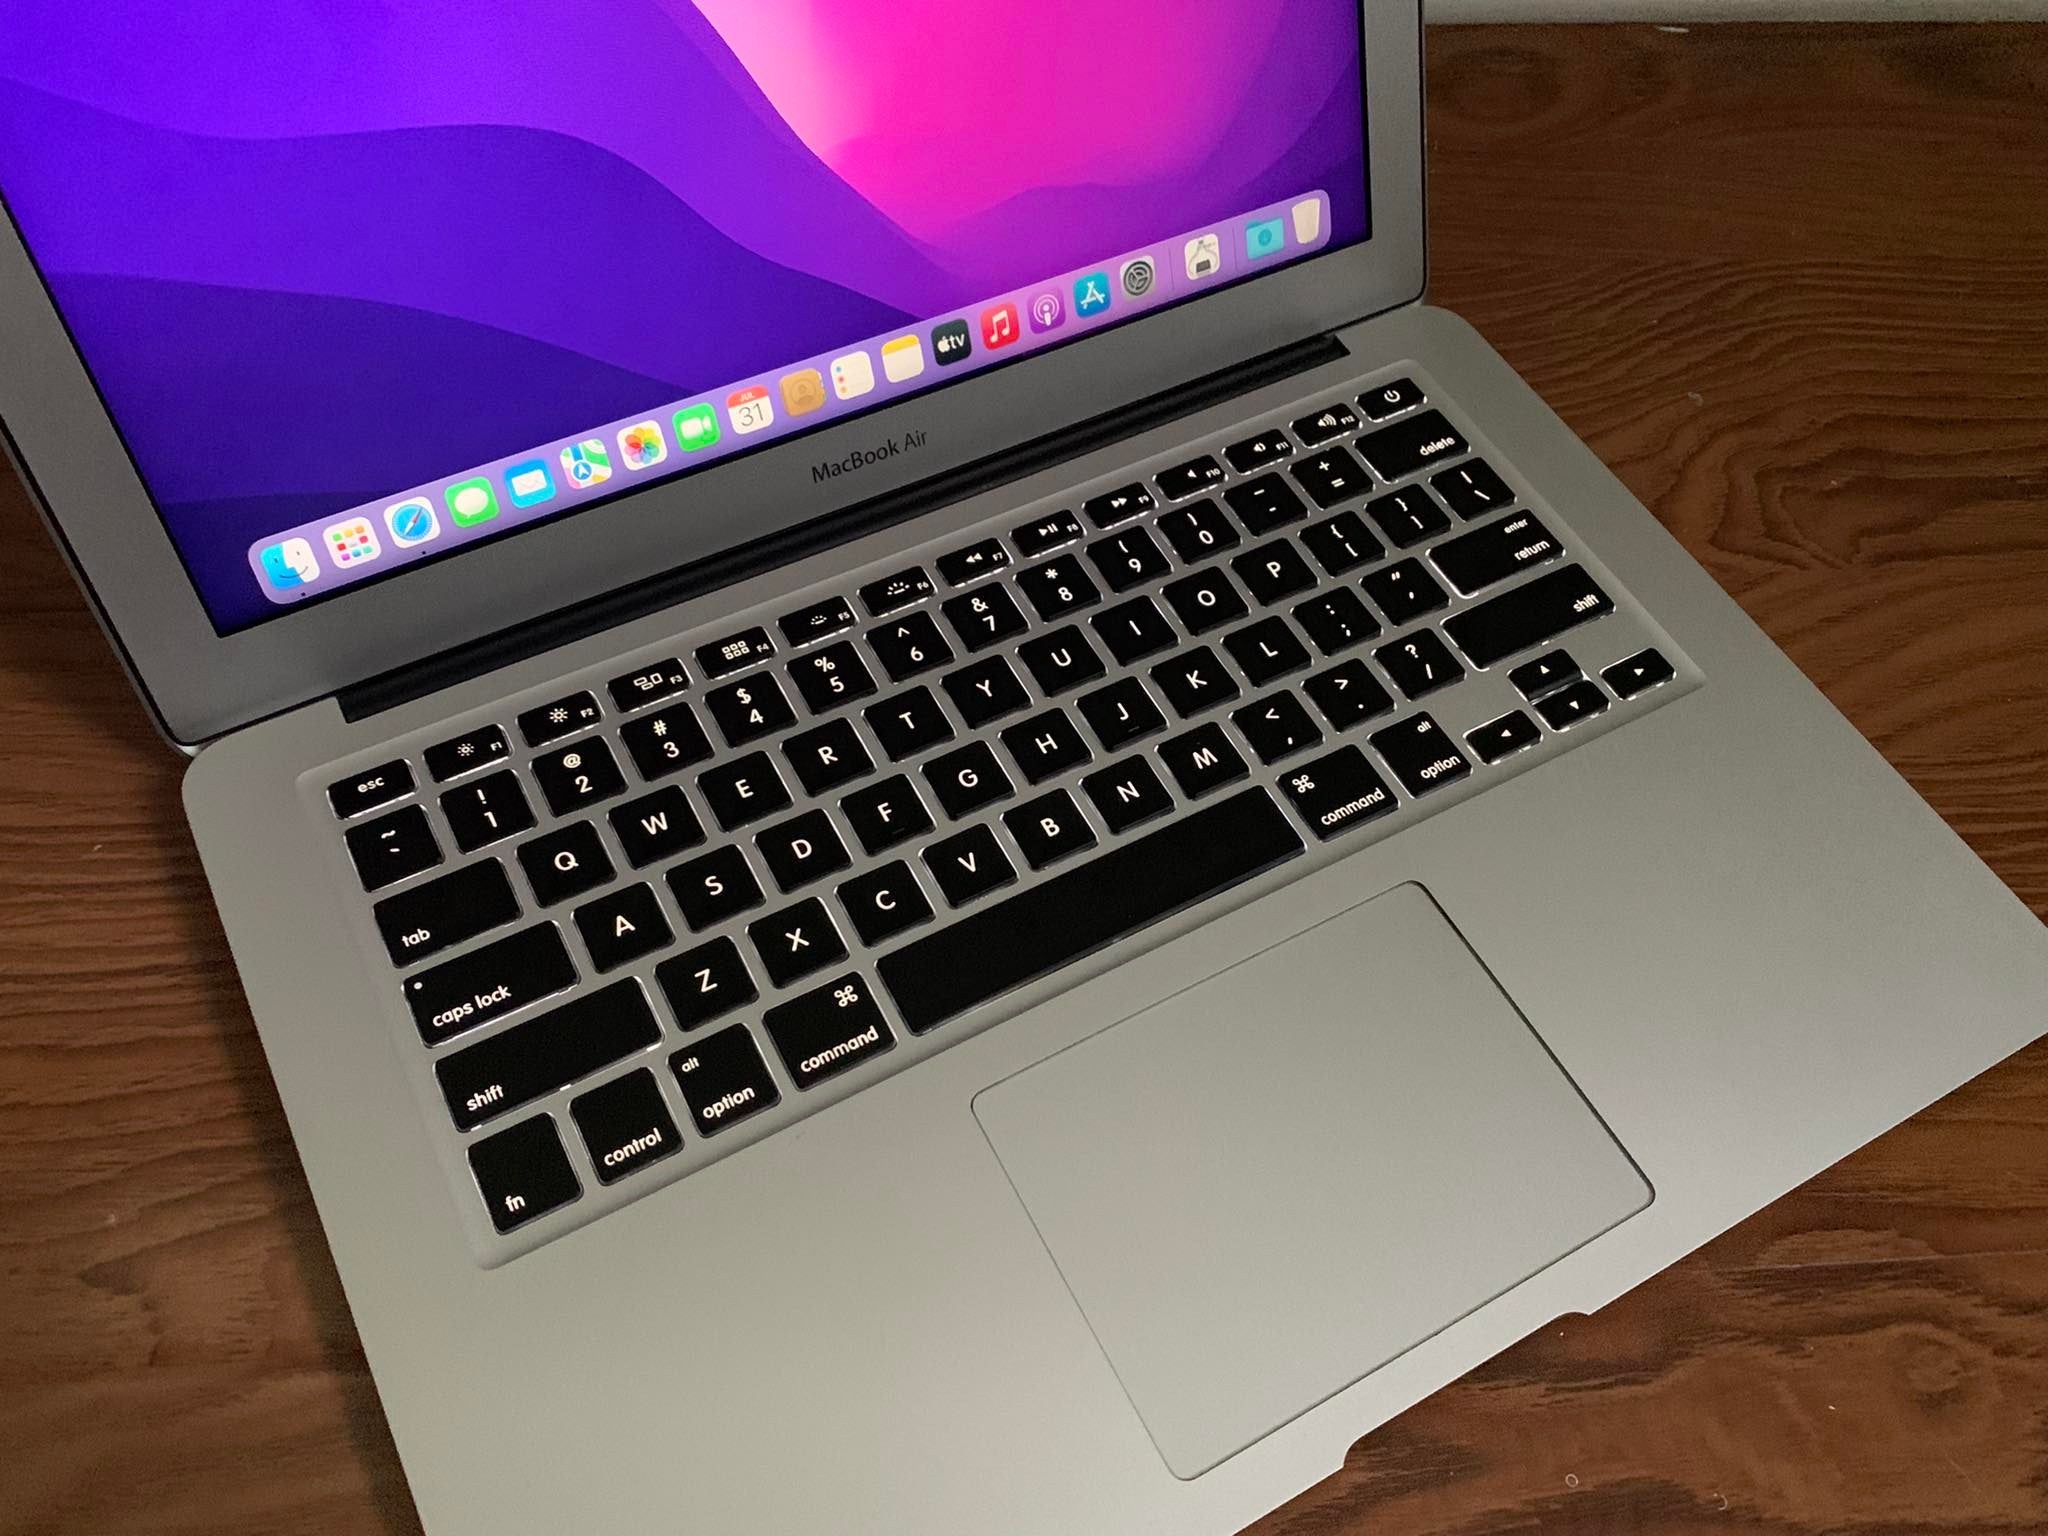 Apple MacBook Air 13 inch 2017 256GB Ultralight Weight suitable for School, Uni & Travelling